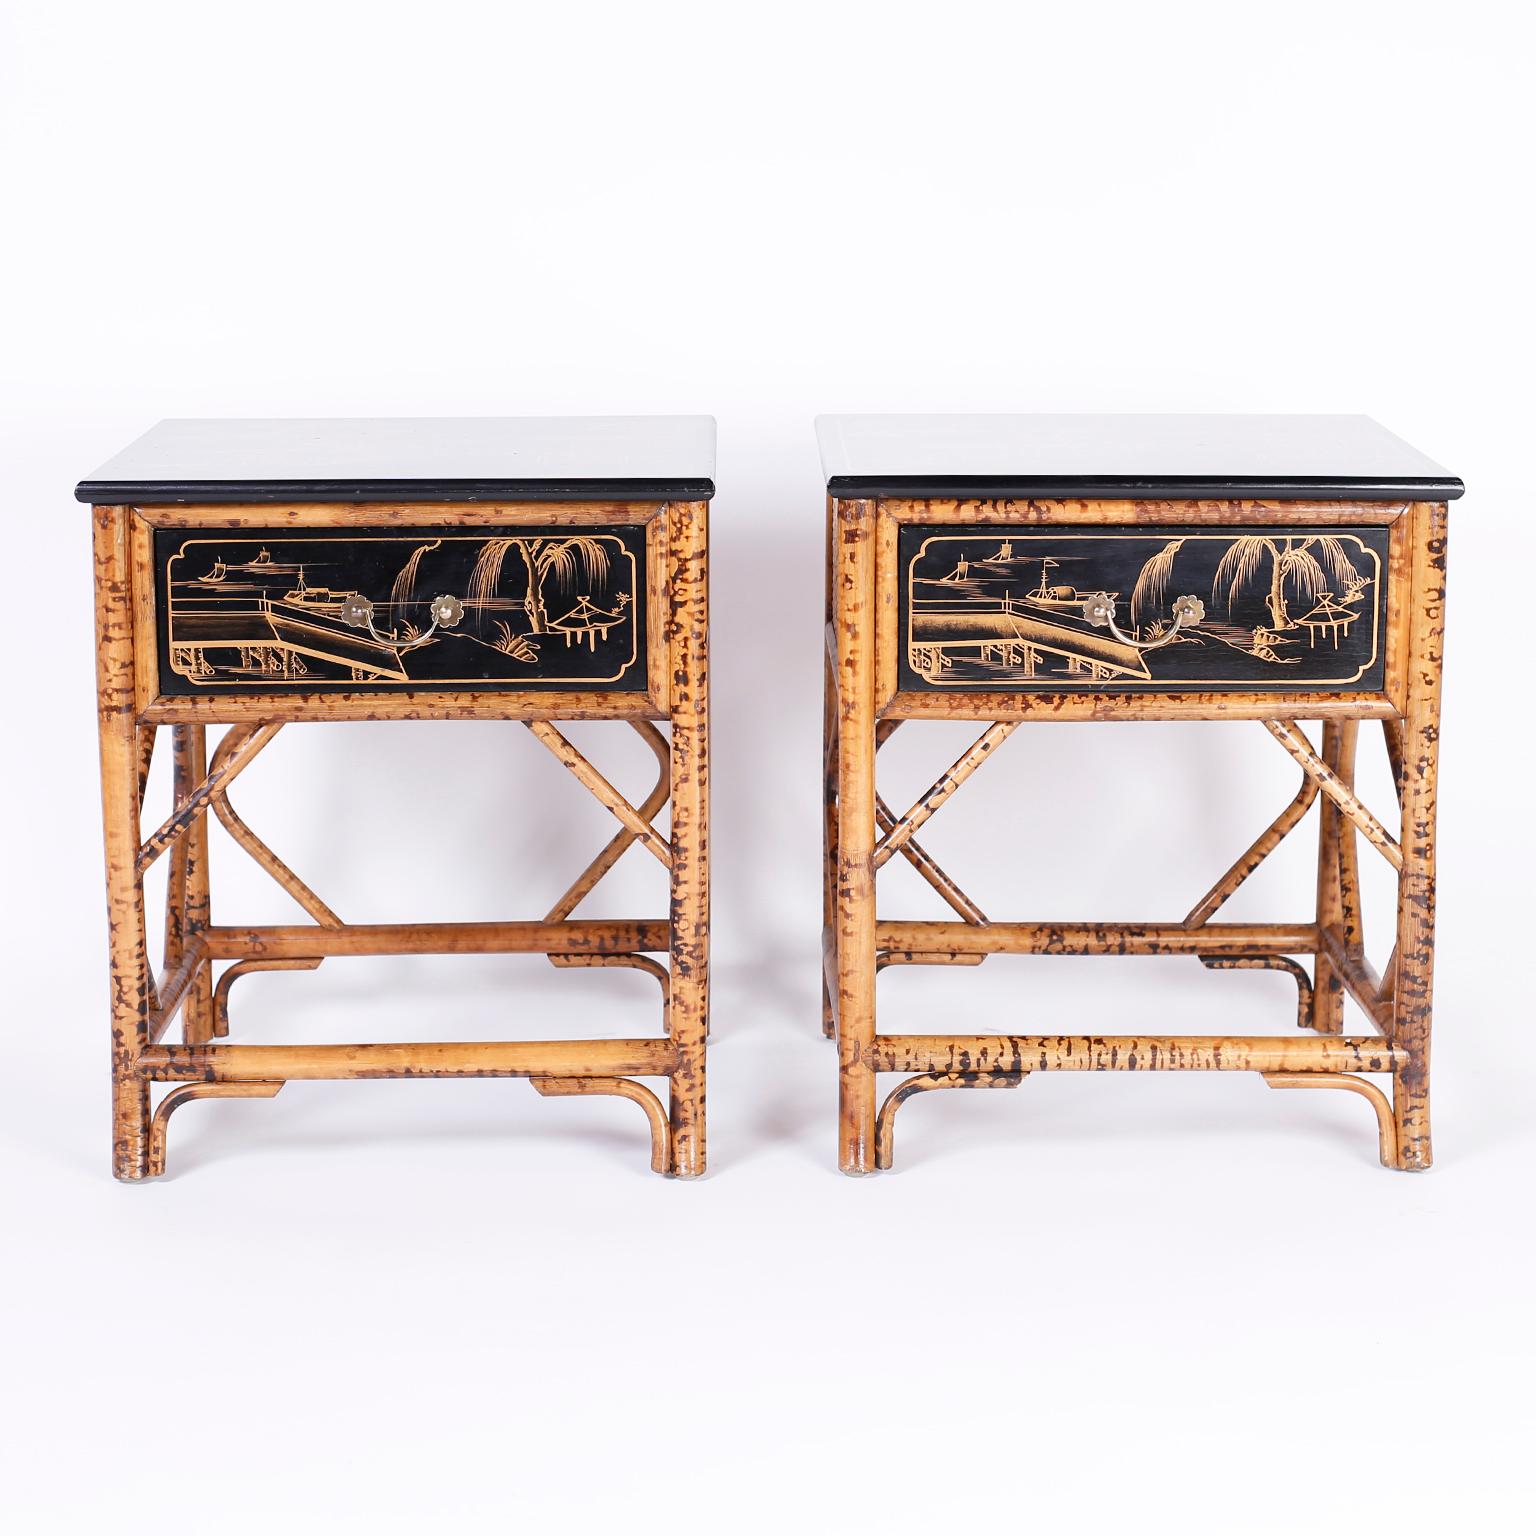 British Colonial Pair of Bamboo and Lacquer Stands or Tables